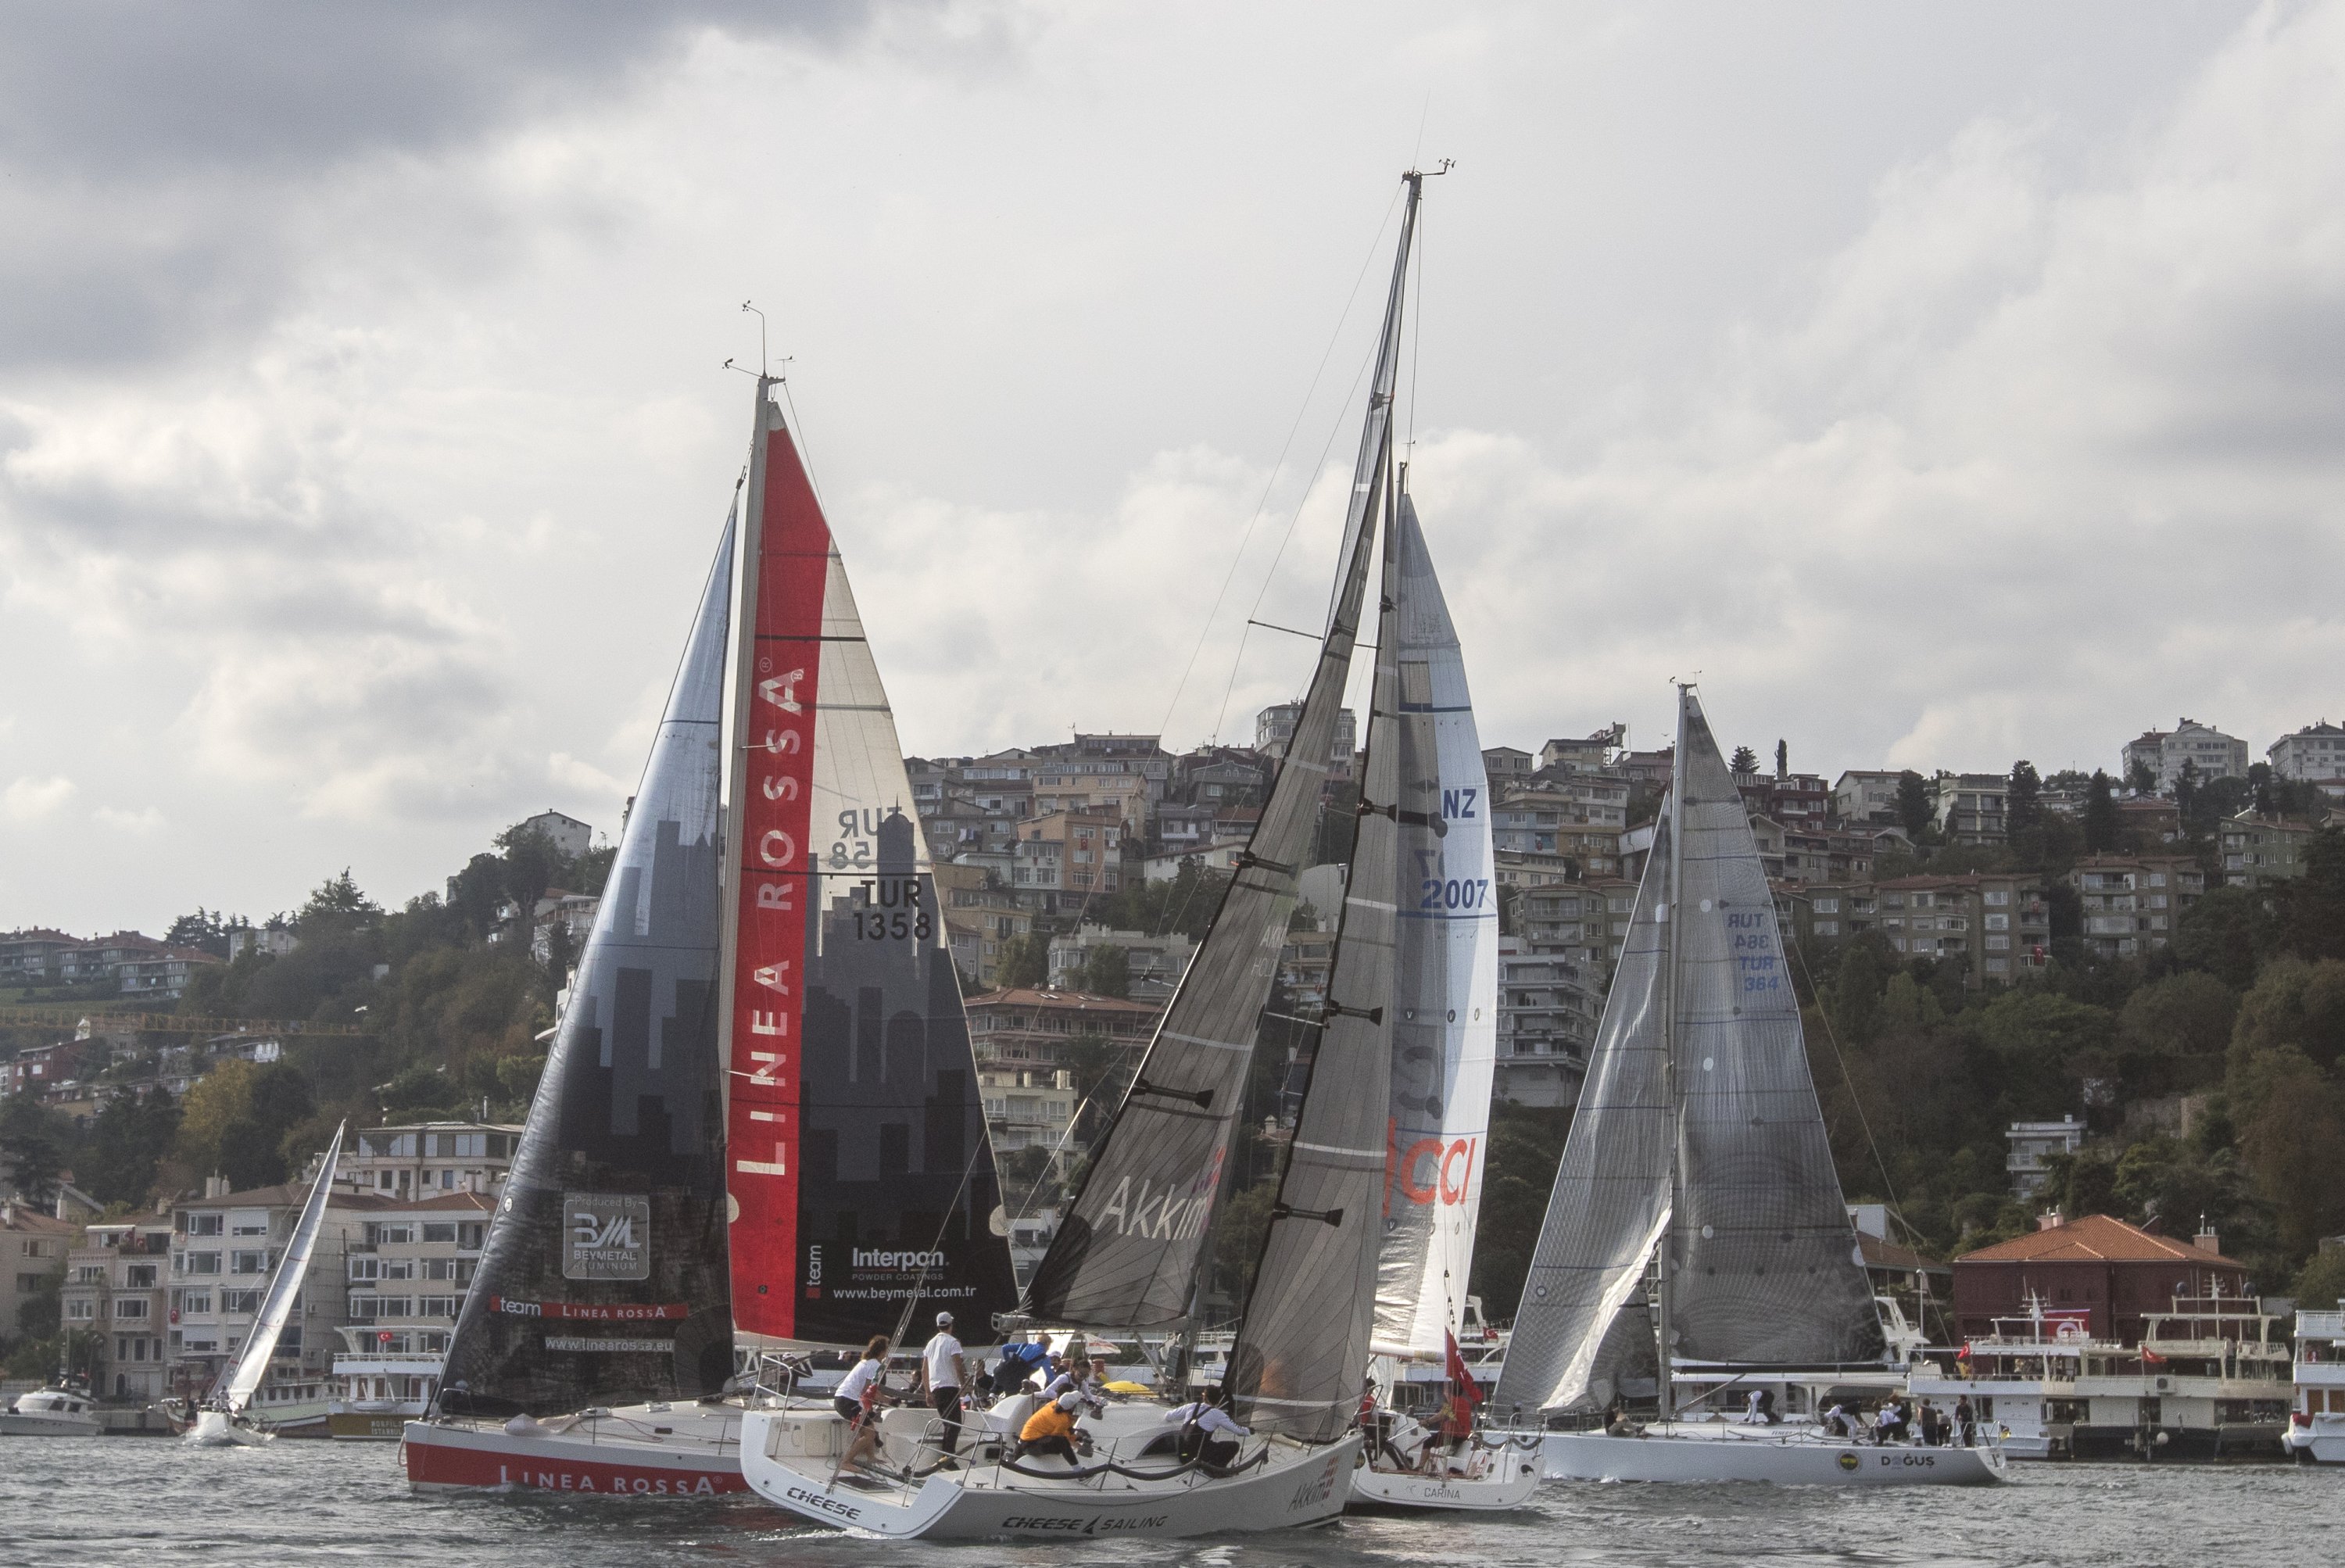 Competitors take part in the 1st Presidential International Yacht Races, Istanbul, Turkey, Oct. 29, 2020. (Courtesy of sailturkey.racing)